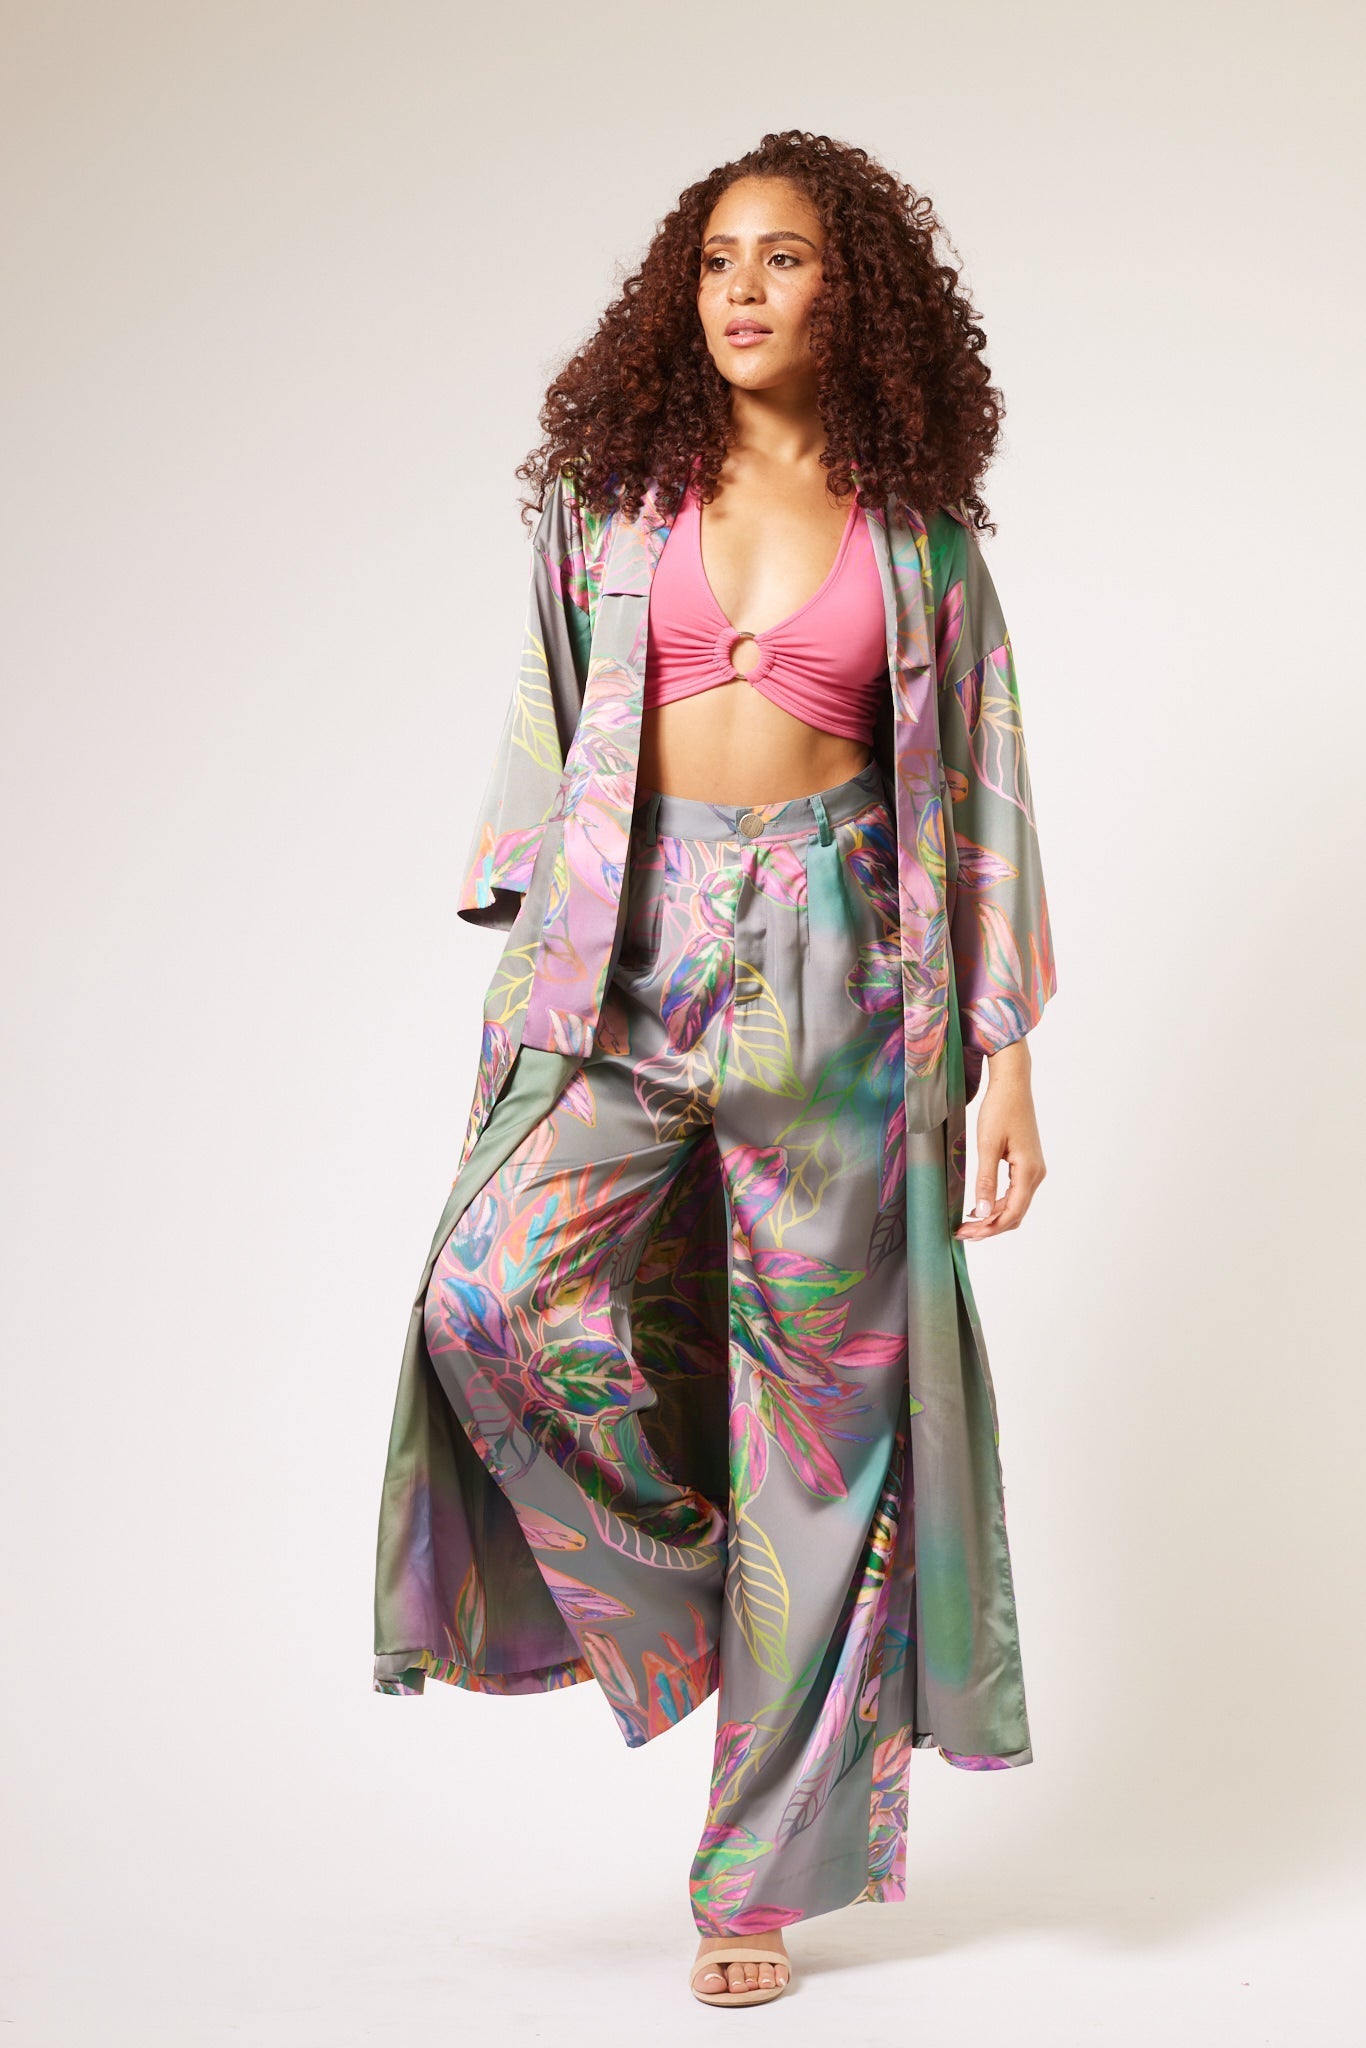 woman modelling all over multicolored tropical print kimono duster and matching yacht slacks made with recycled textiles 3